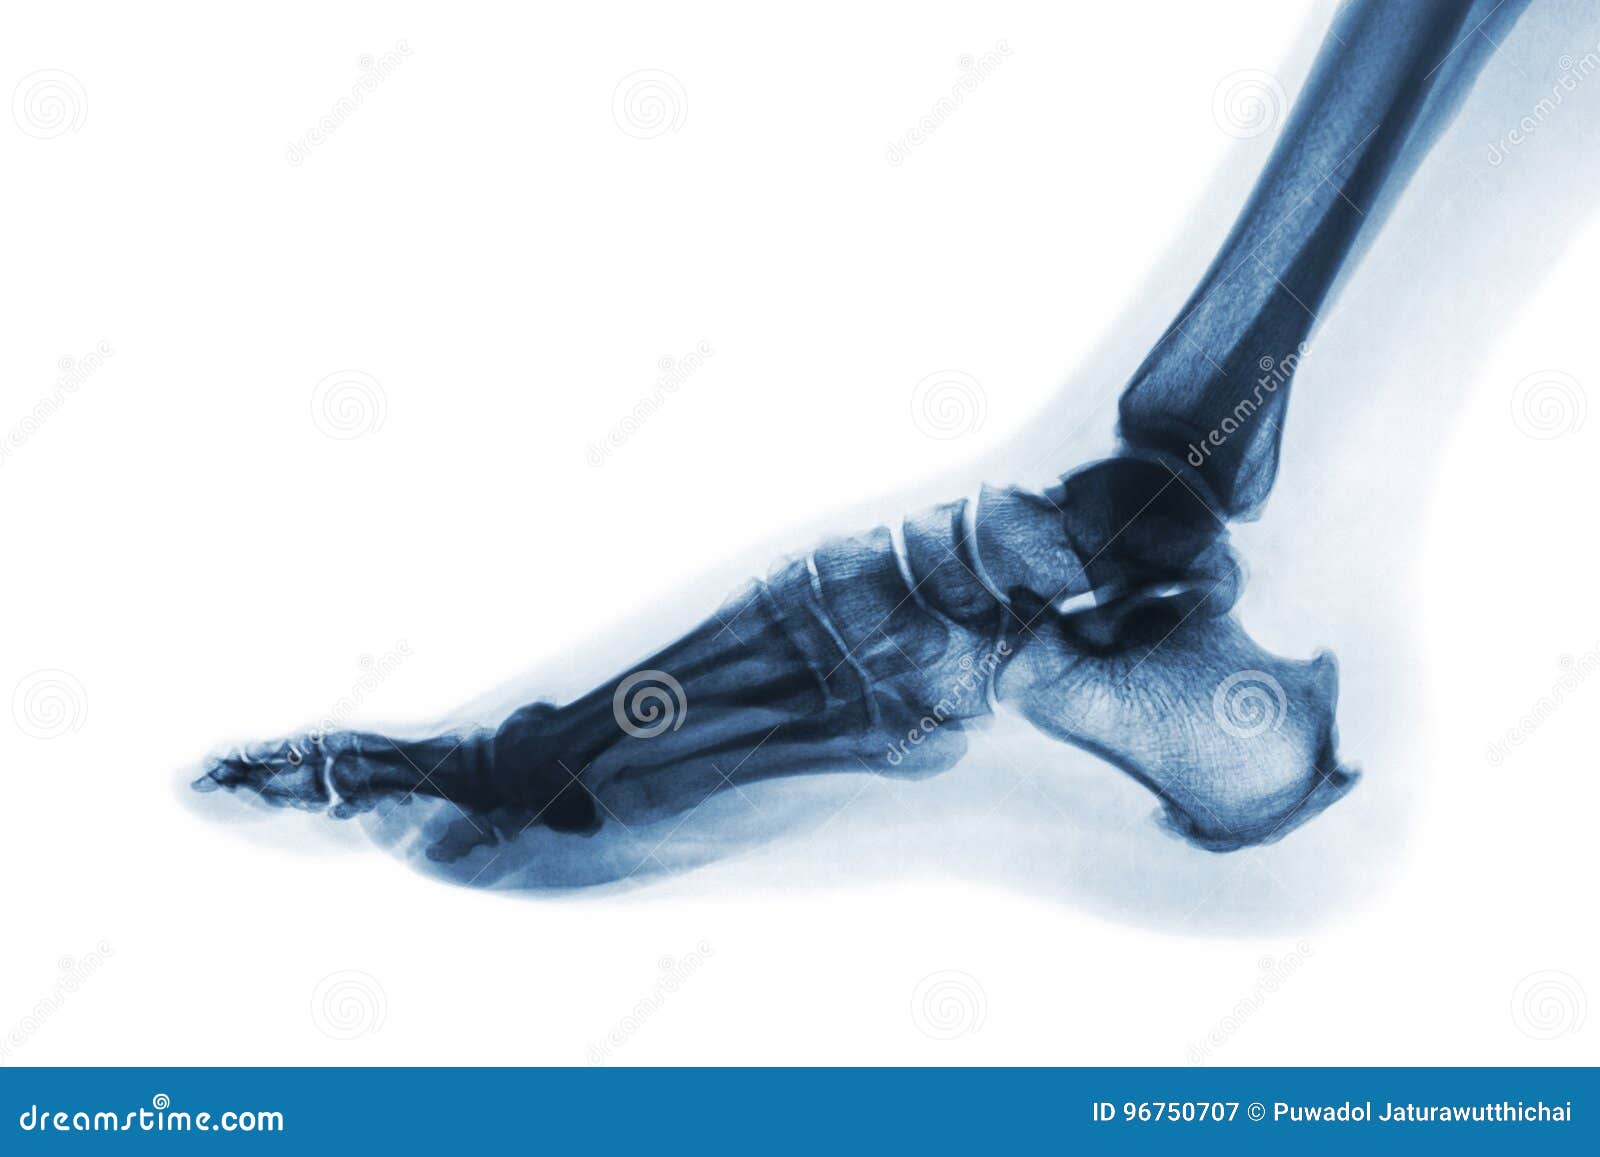 x-ray normal human foot . lateral view . invert color style